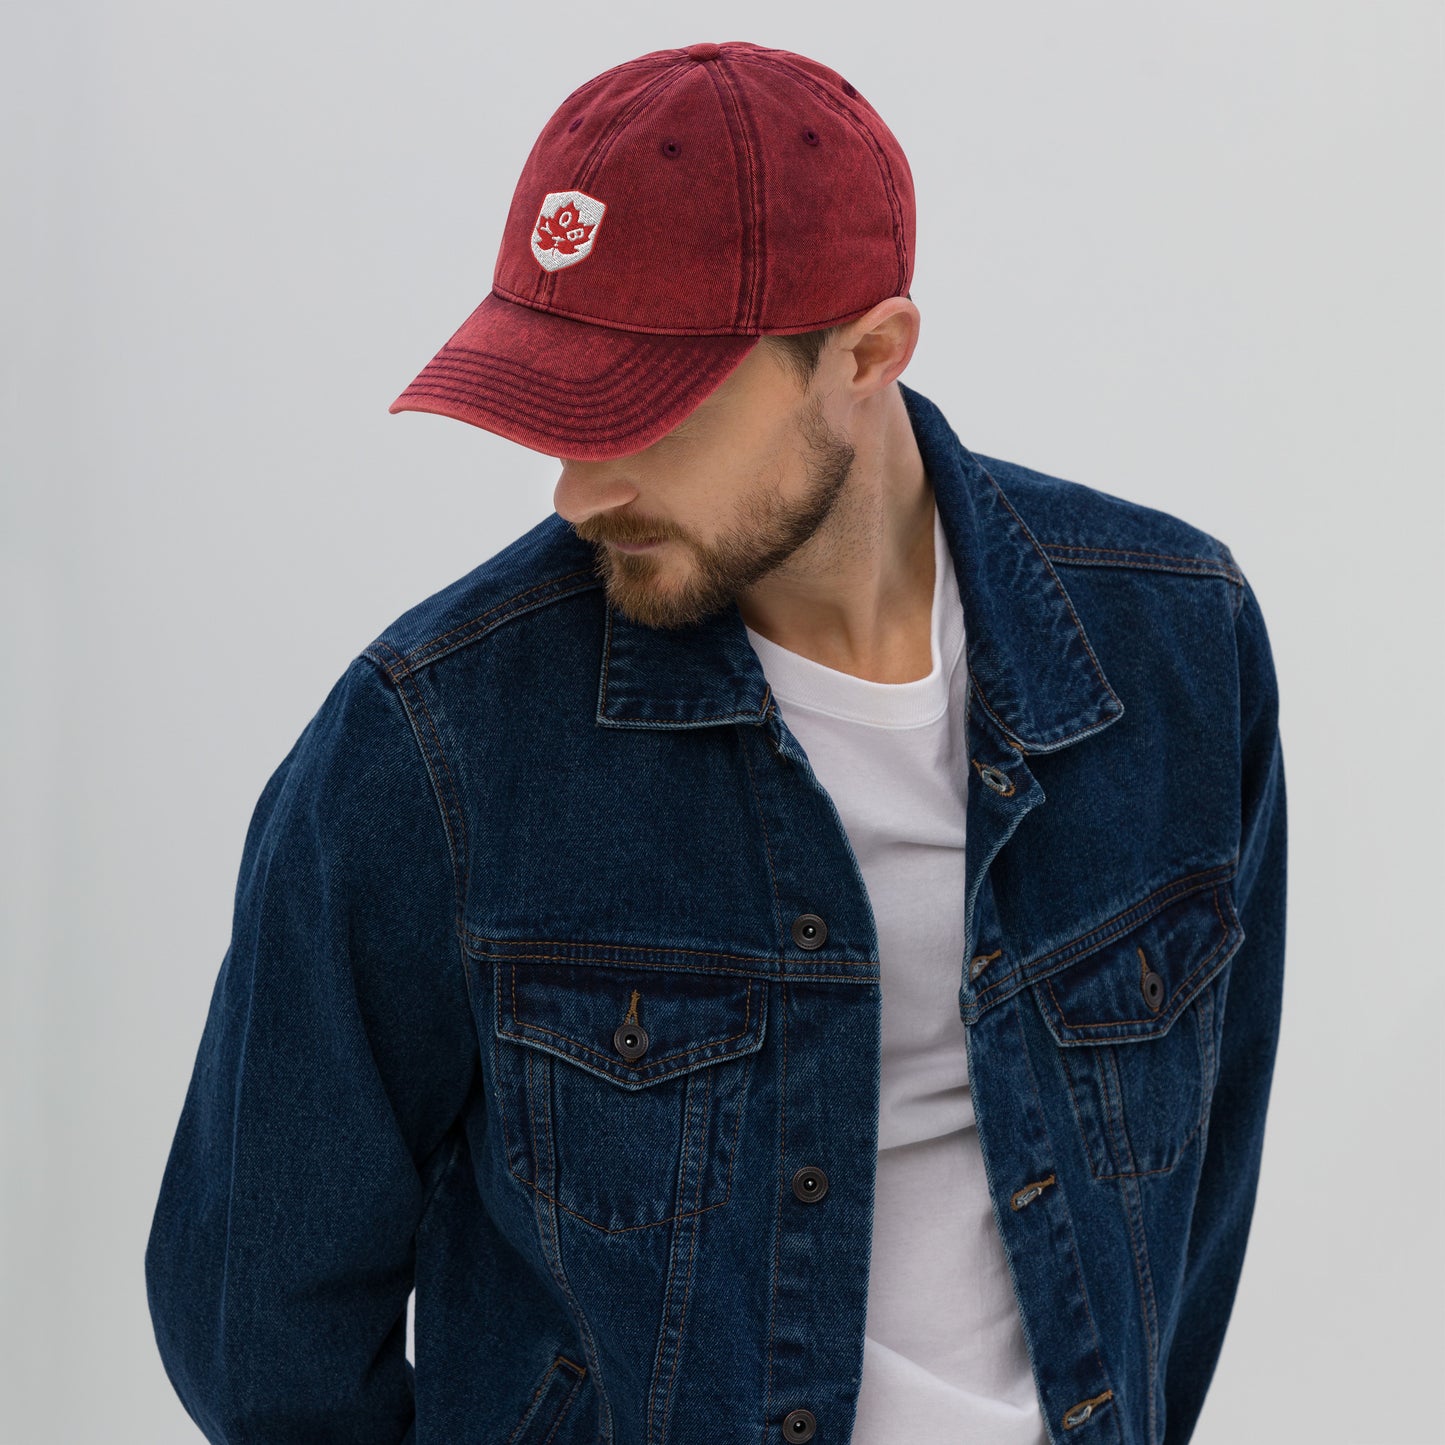 Maple Leaf Twill Cap - Red/White • YQB Quebec City • YHM Designs - Image 08